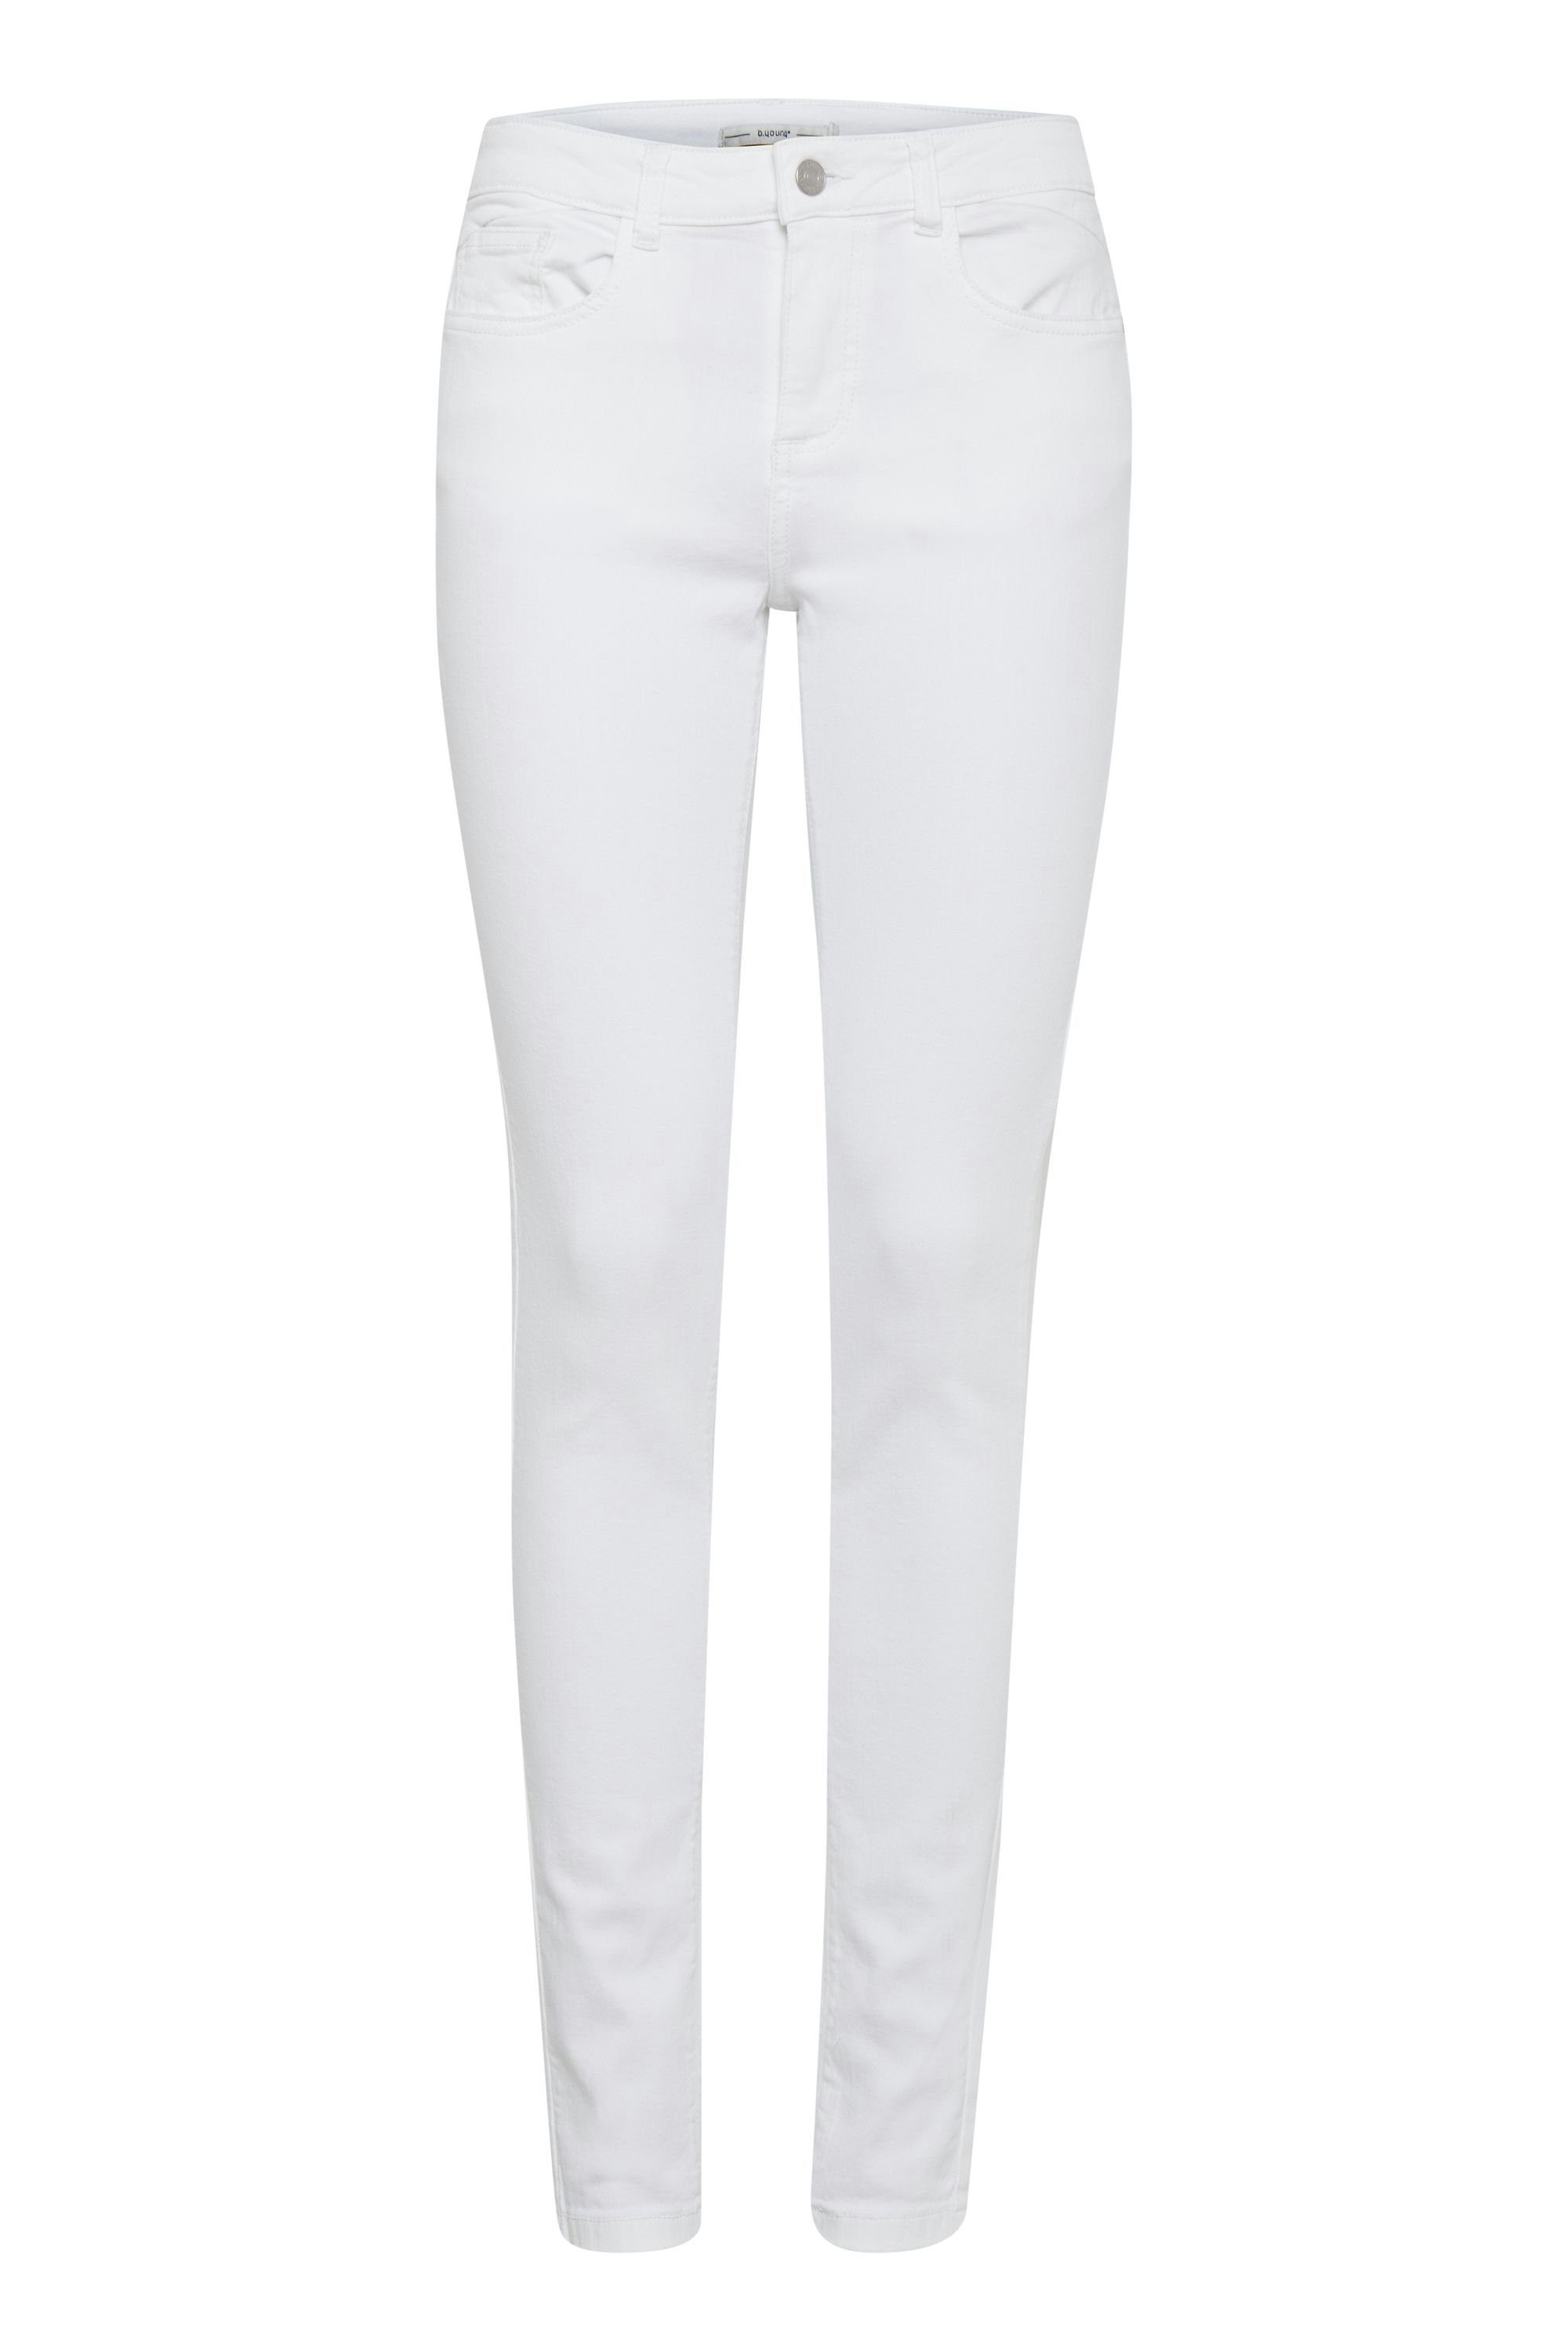 b.young Skinny-fit-Jeans jeans Optical Luni 20803214 White - BYLola (80100)